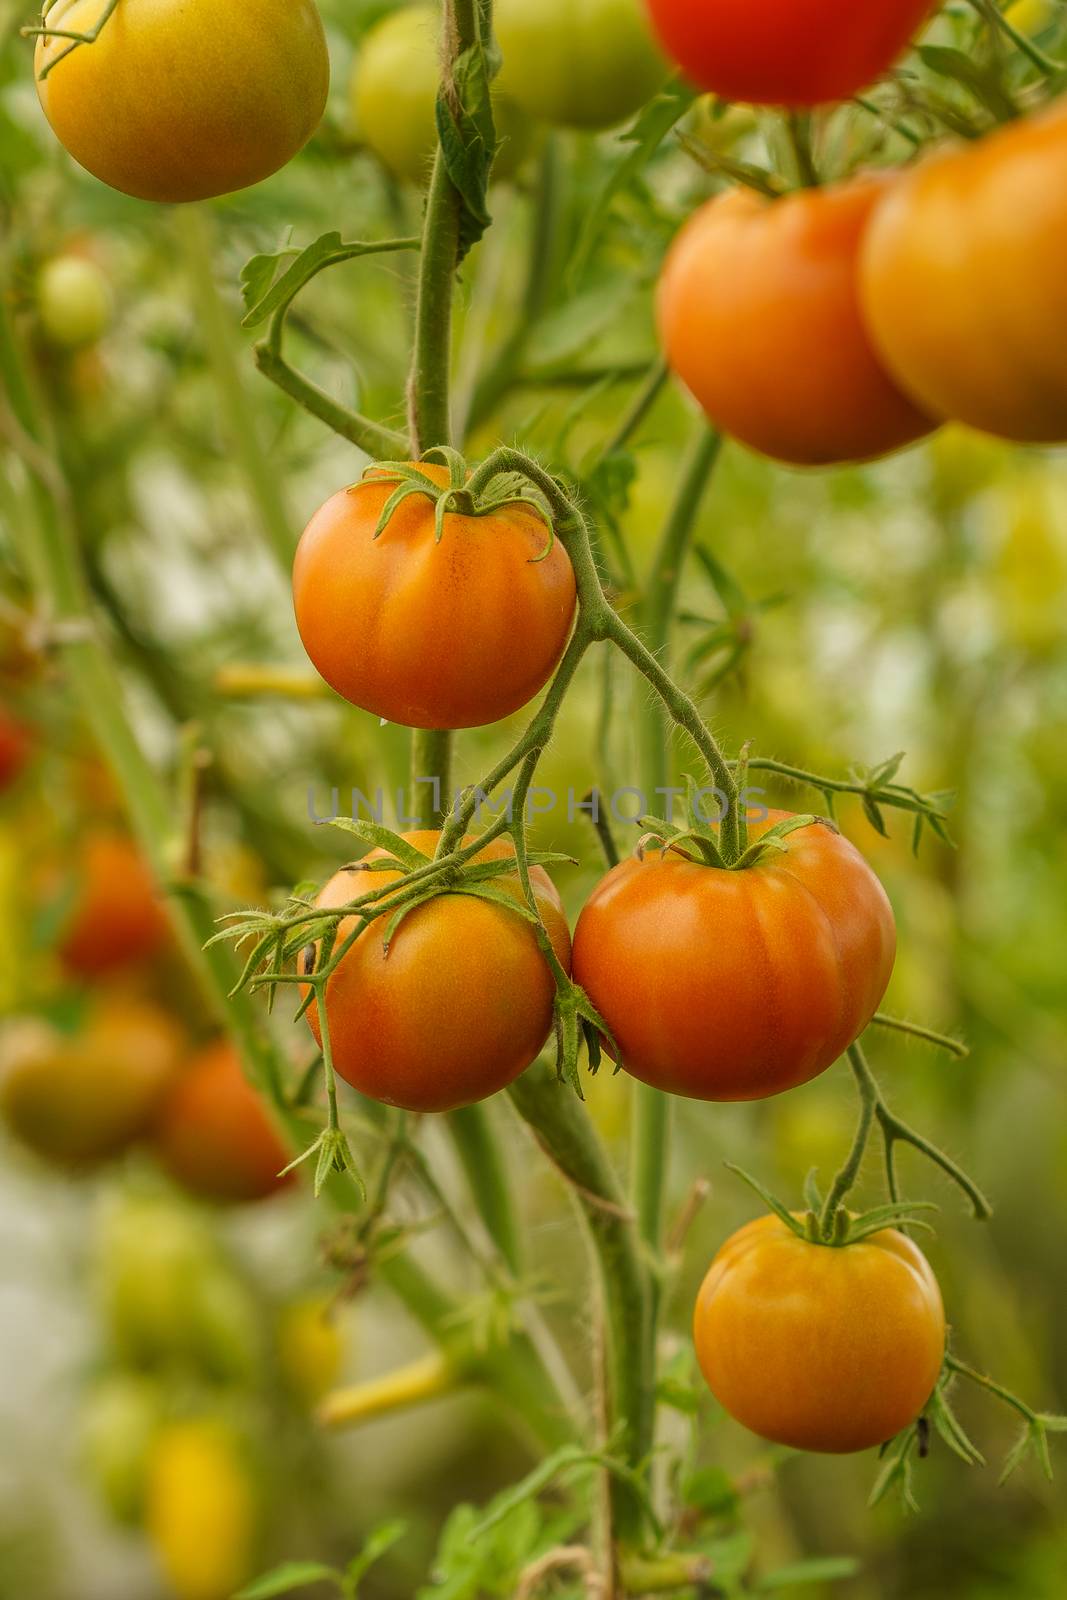 ripening tomatoes in a greenhouse on stems by VADIM